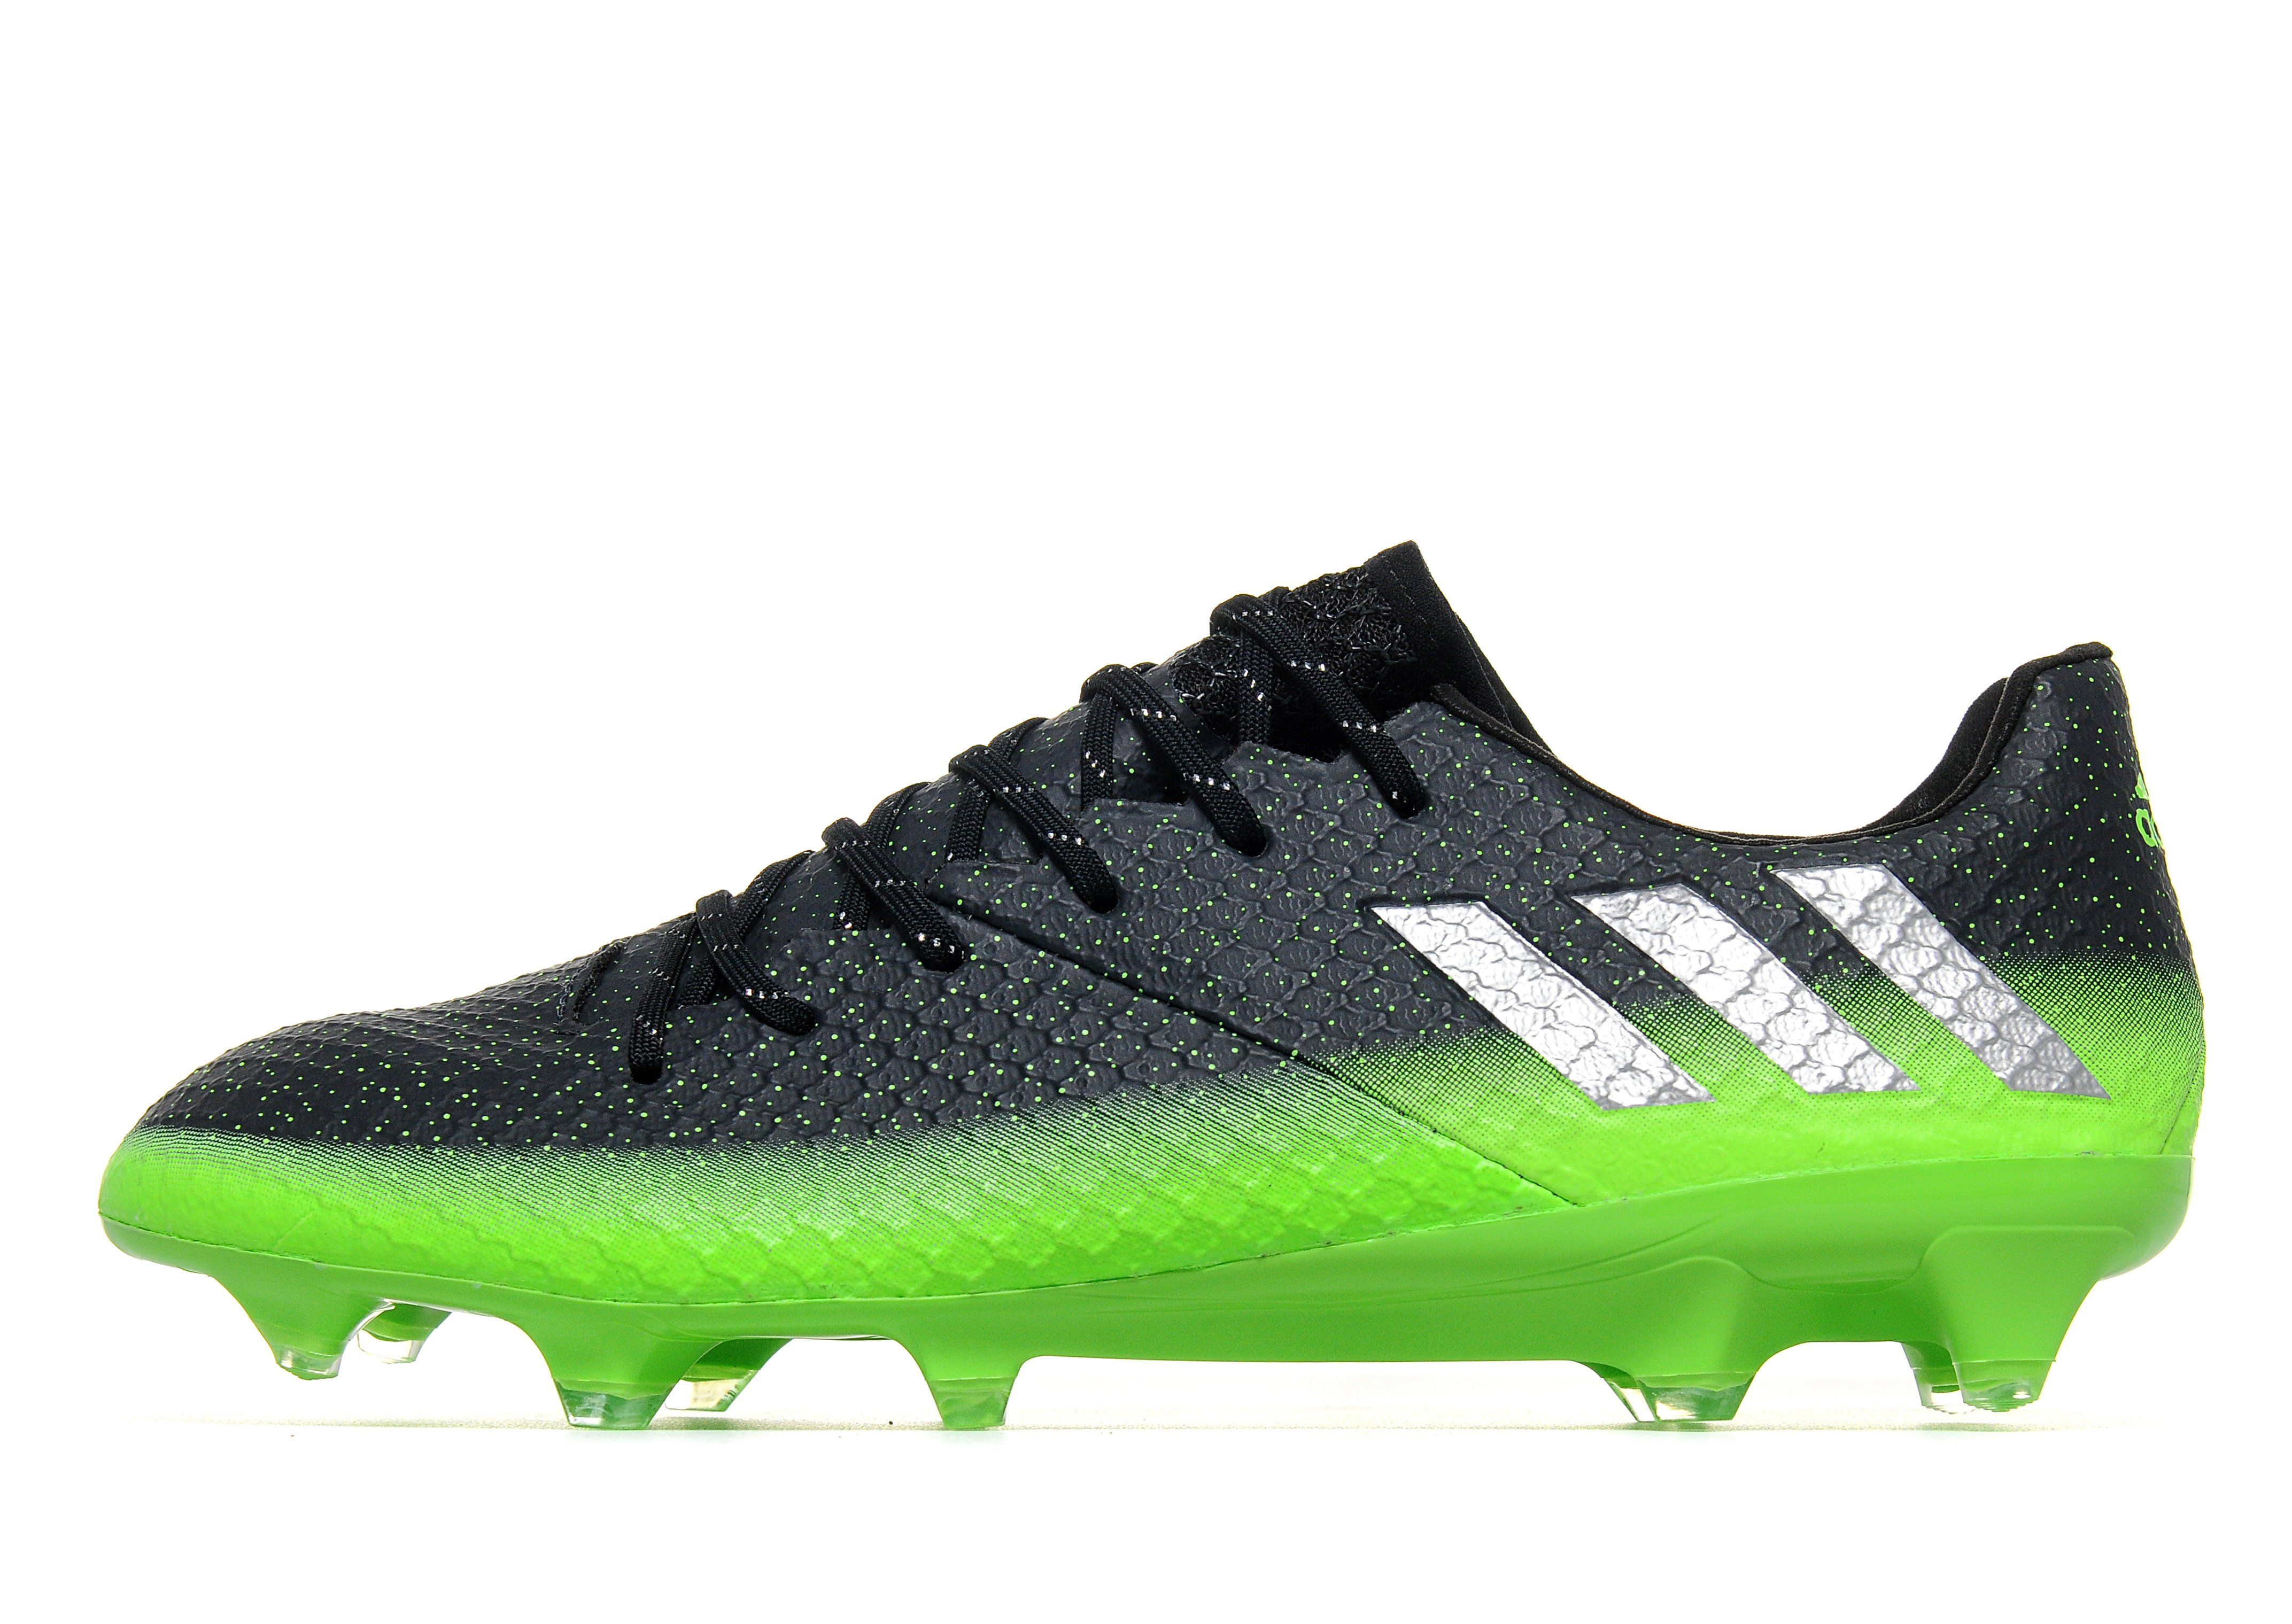 adidas messi space dust boots